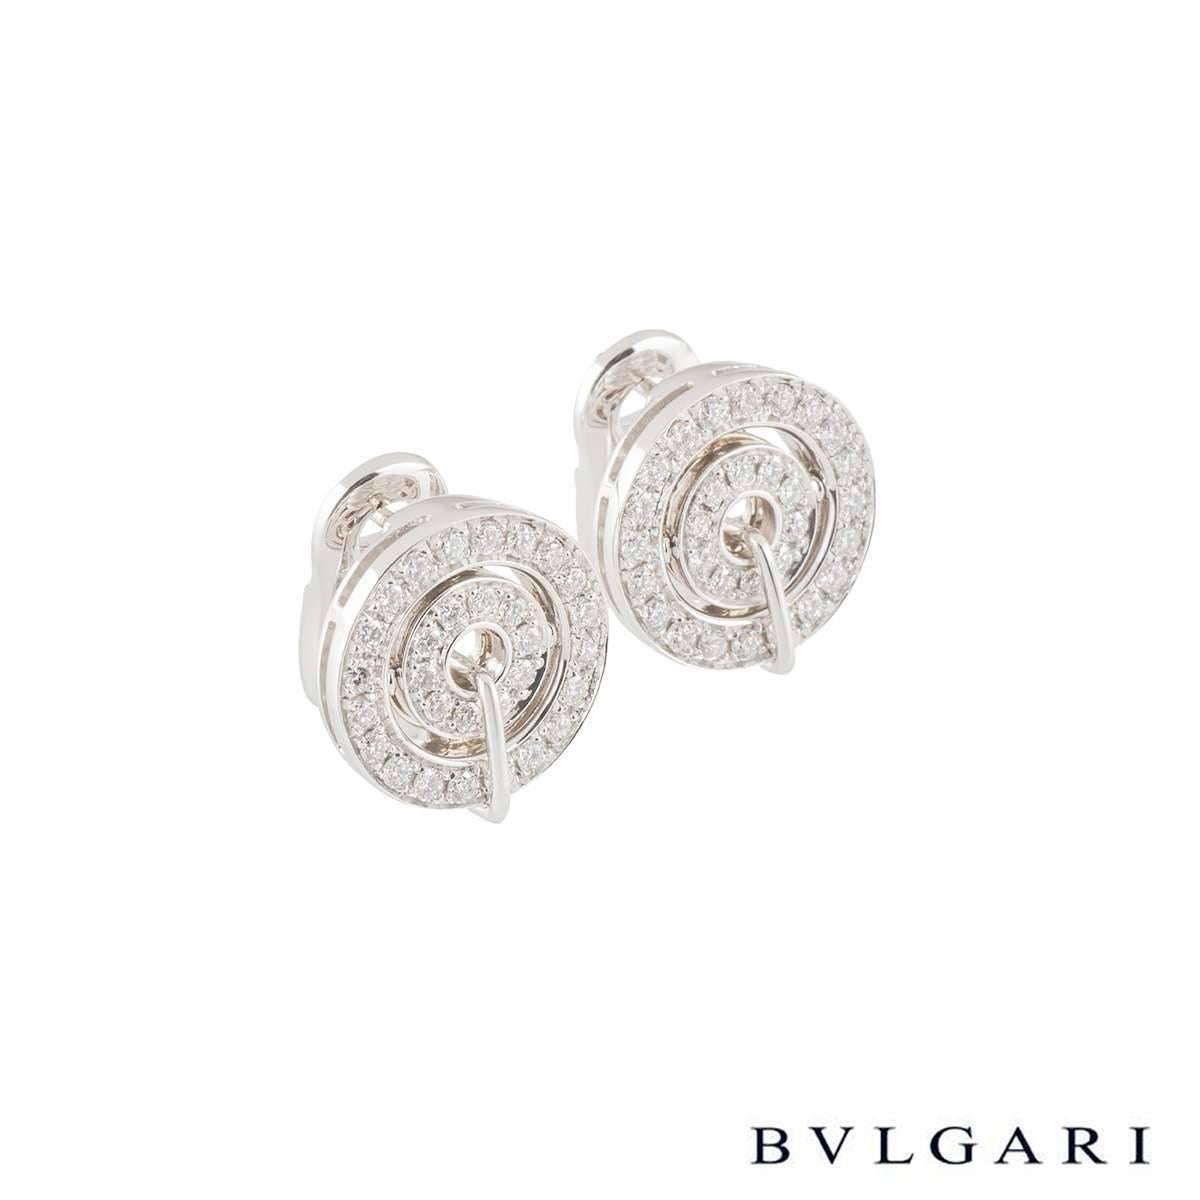 A beautiful pair of 18k white gold earrings from the Astrale collection by Bvlgari. The circular openwork earrings are each set with an inner circle set with 10 diamonds and the outer set with 20 diamonds. The round brilliant cut diamonds have a